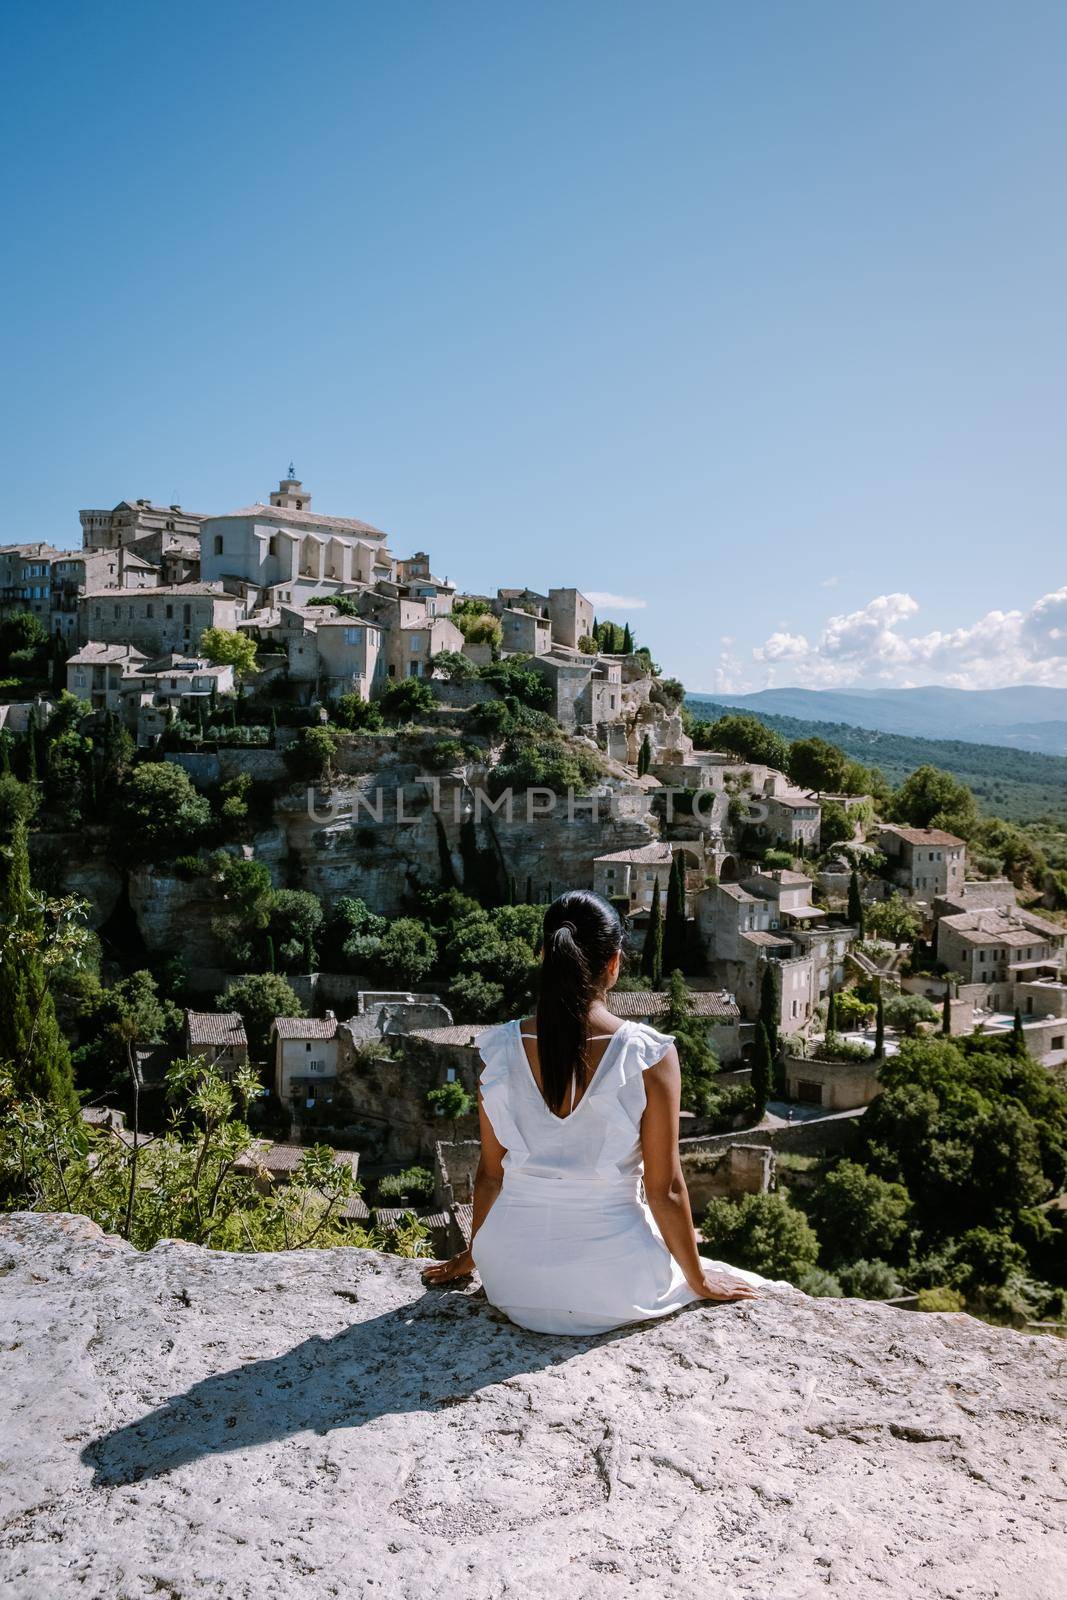 View of Gordes, a small medieval town in Provence, France. A view of the ledges of the roof of this beautiful village and landscape. Europe